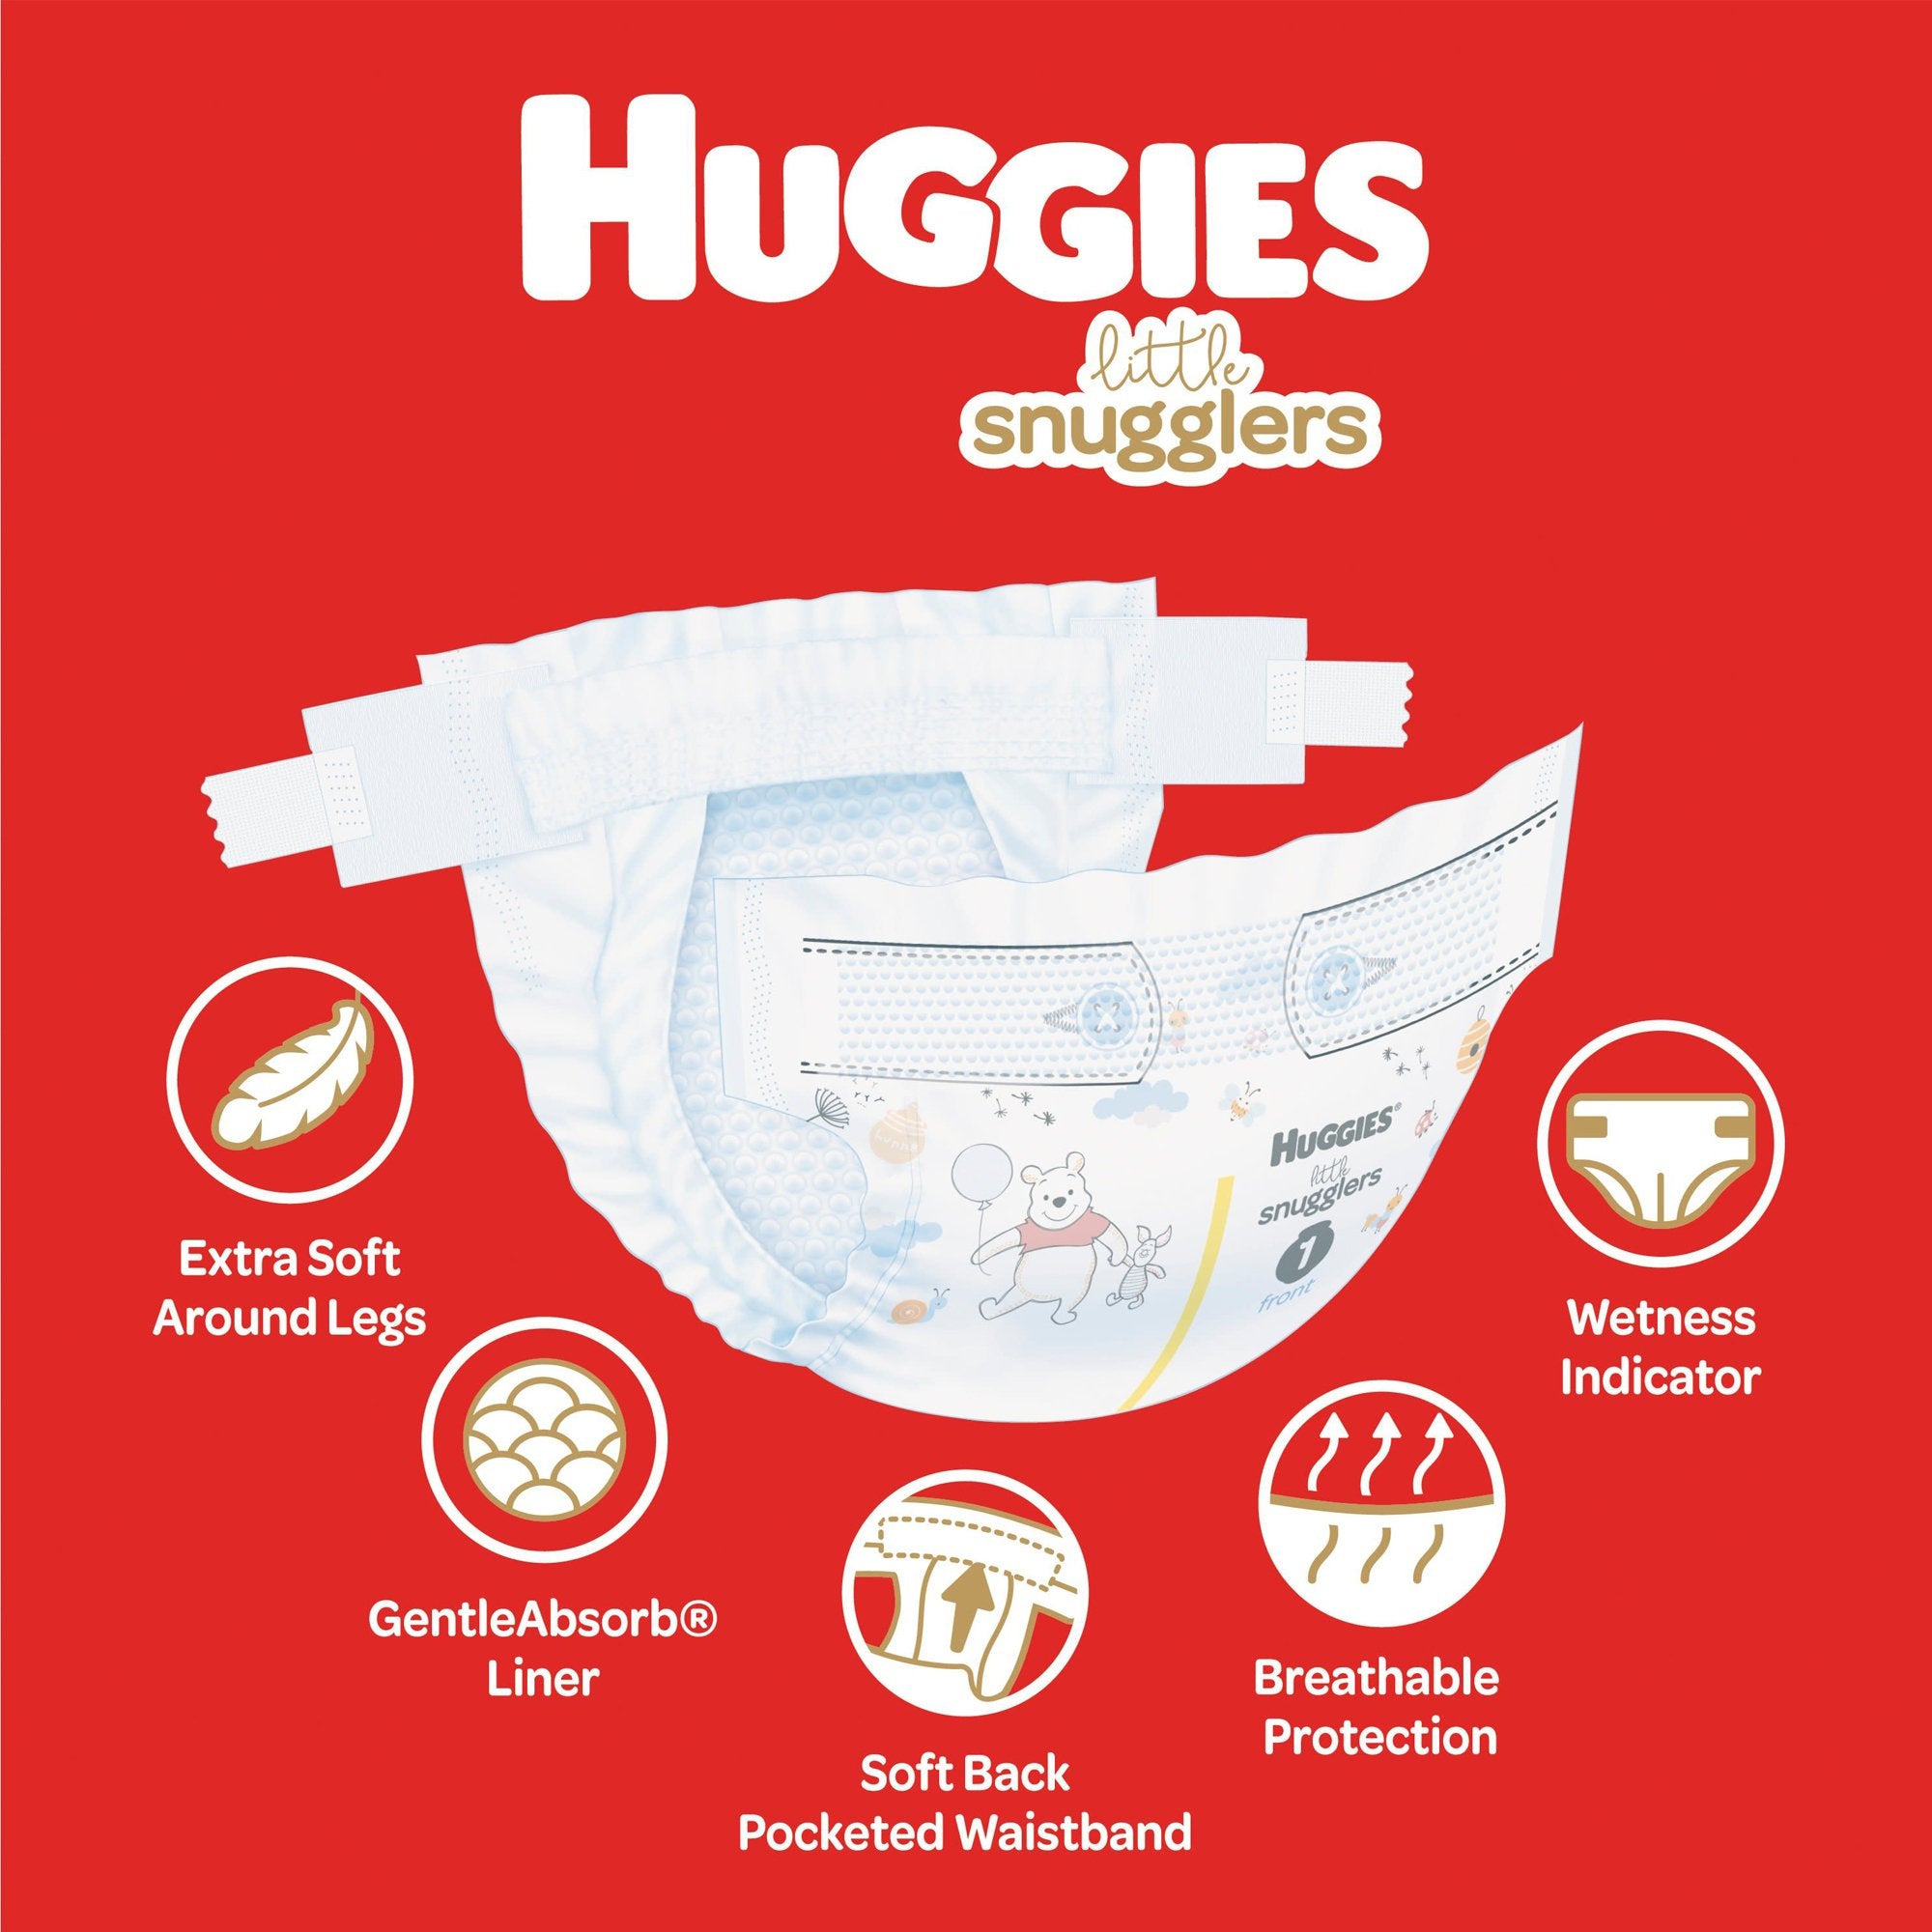 Unisex Baby Diaper Huggies Little Snugglers Size 1 Disposable Moderate Absorbency